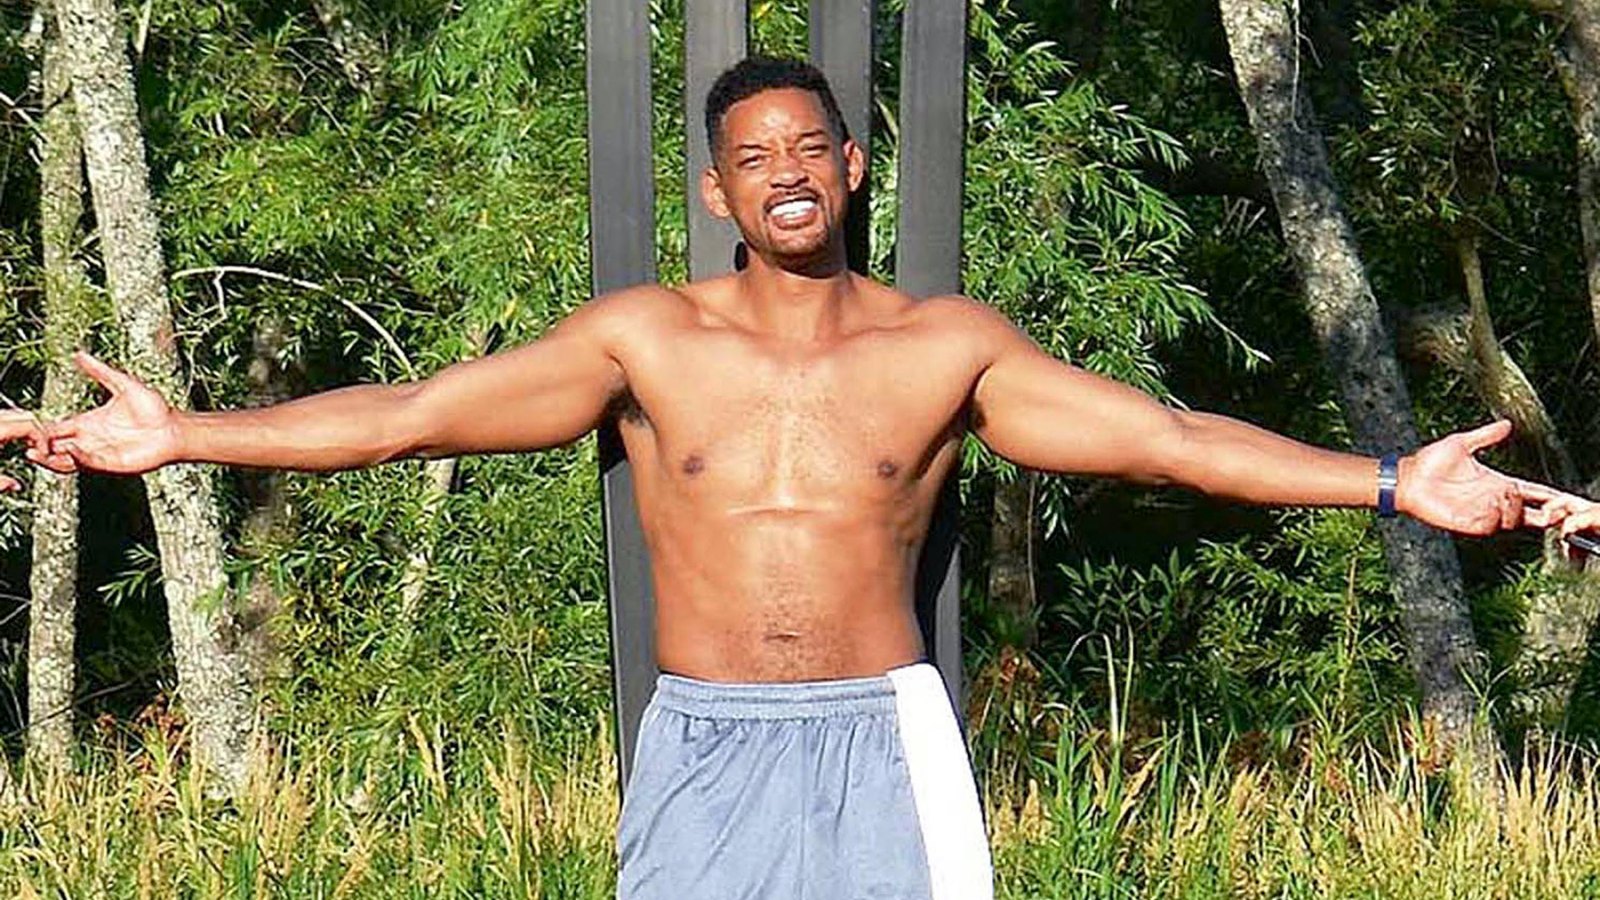 Will Smith shirtless in Argentina, Dec. 2013